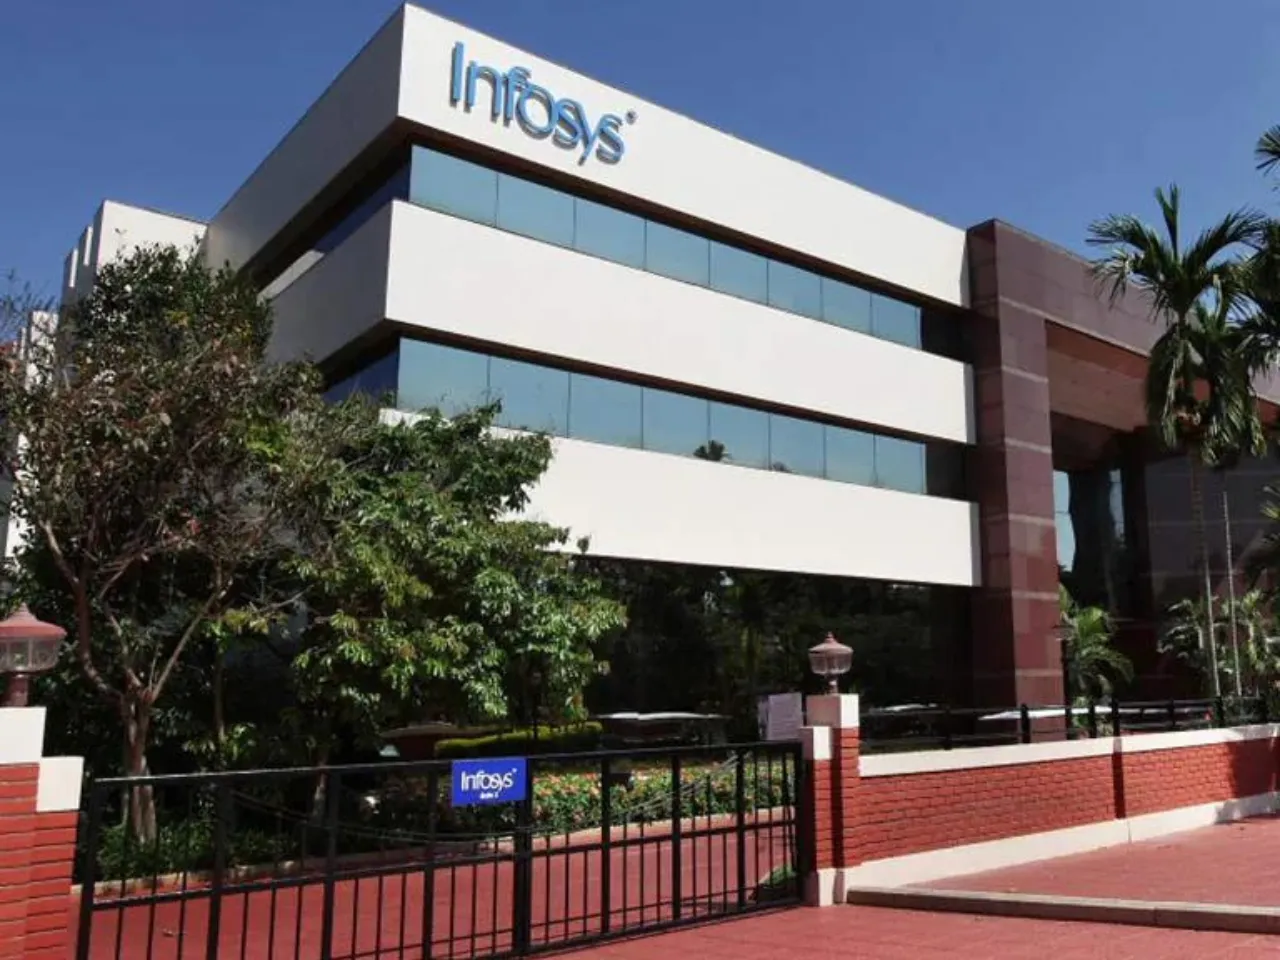 Tech giant Infosys receives tax demand of Rs 341 crore from the Income Tax department